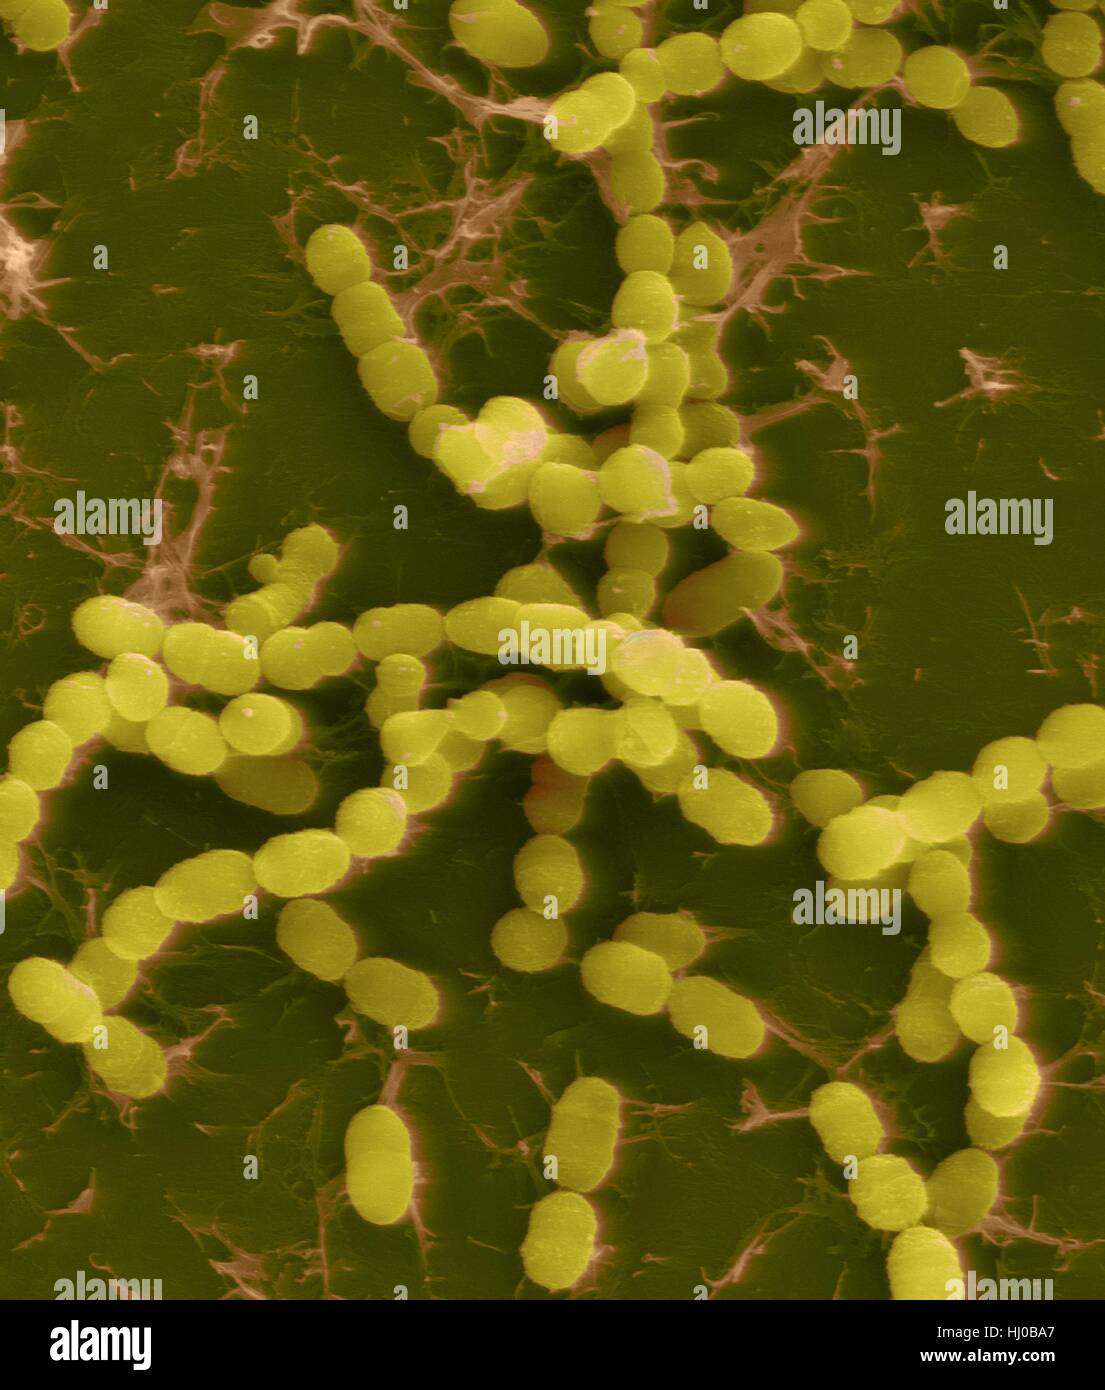 Coloured scanning electron micrograph (SEM) of Streptococcus thermophilus,Gram-positive,coccoid prokaryote (bacterium).Streptococcus thermophilus (also known as: Streptococcus salivarius subsp.thermophilus) is facultative anaerobe that belongs to group of lactic acid bacteria that convert lactose Stock Photo